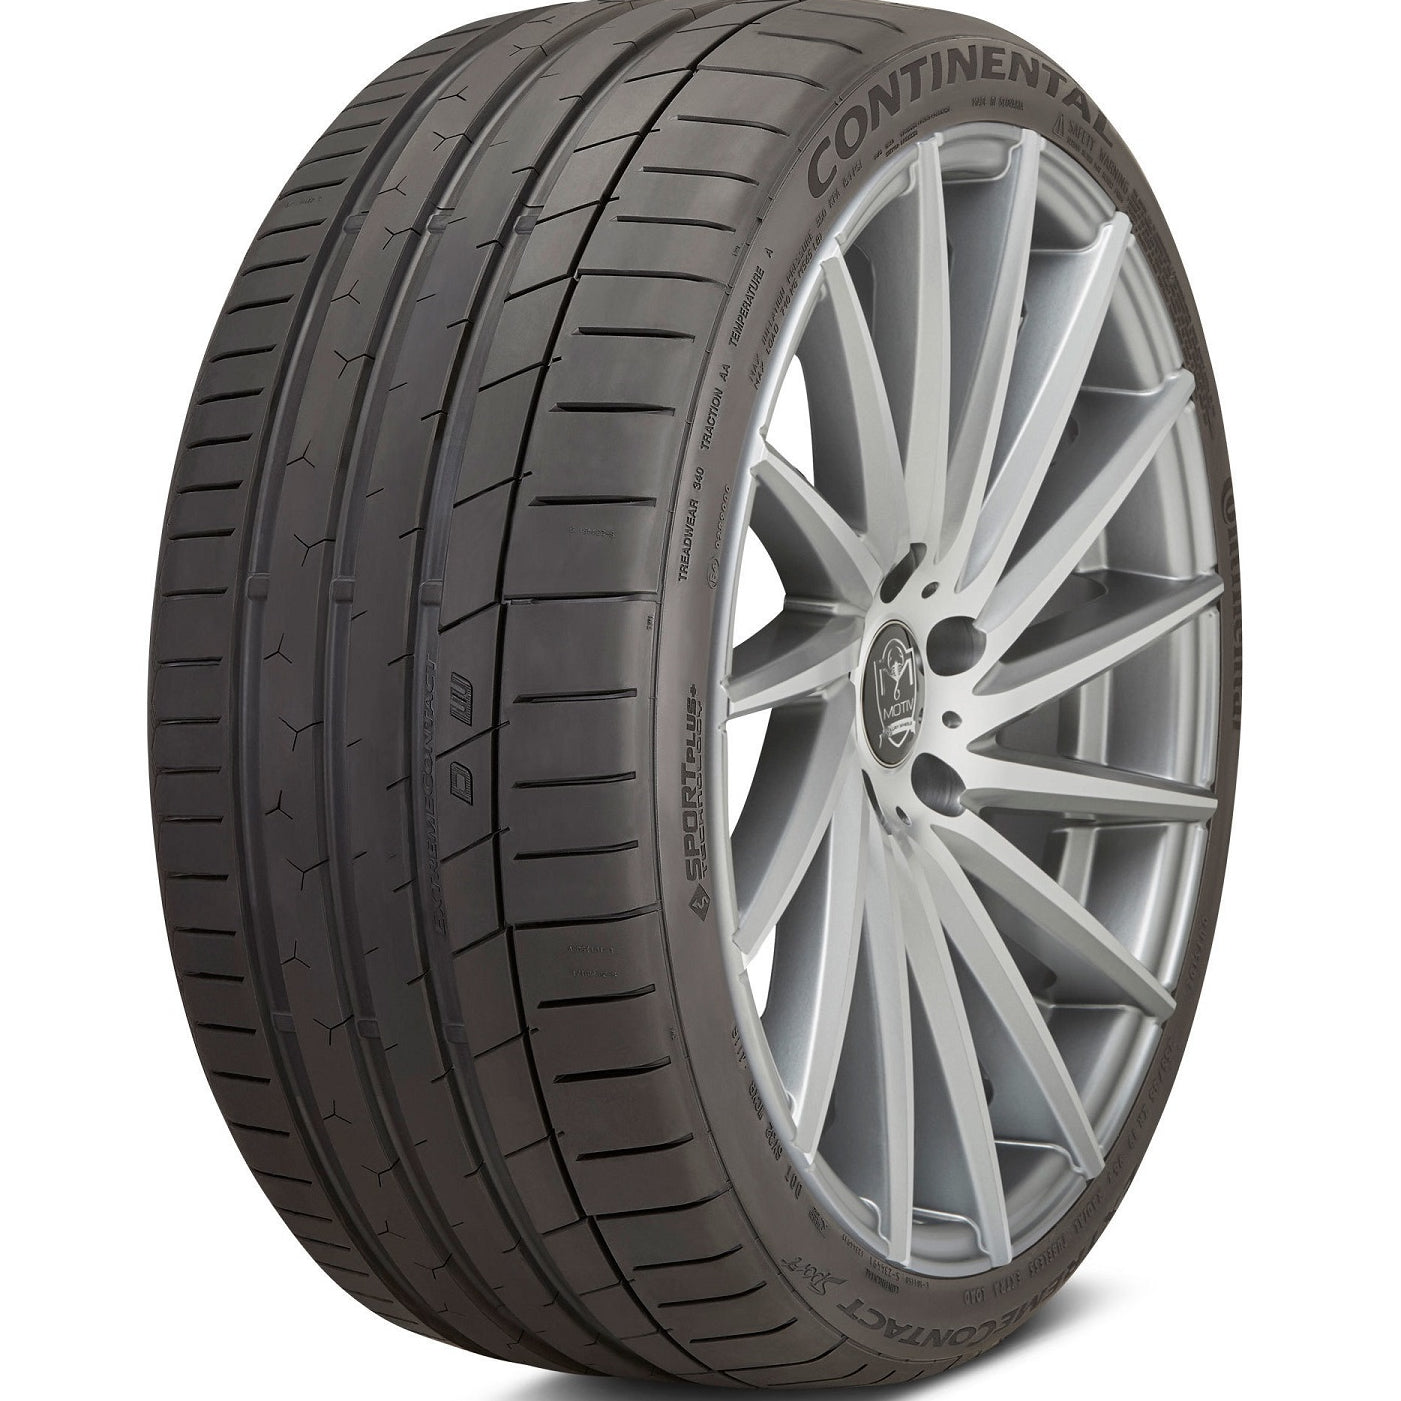 CONTINENTAL EXTREMECONTACT SPORT 255/40ZR18 (26X10R 18) Tires